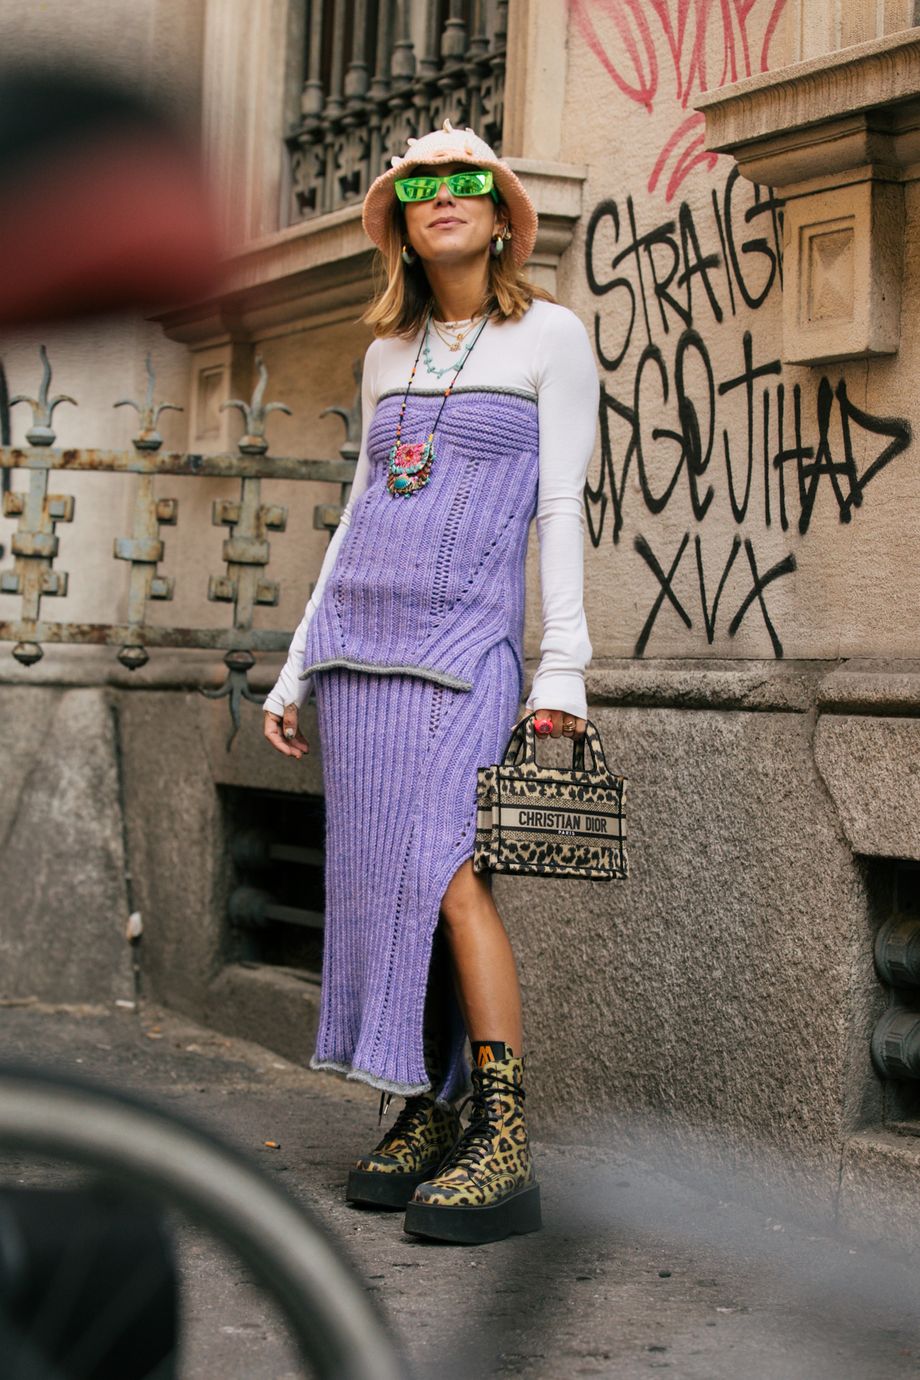 Shop 8 Milan Fashion Week Street Style Looks From the Spring 2022 Shows